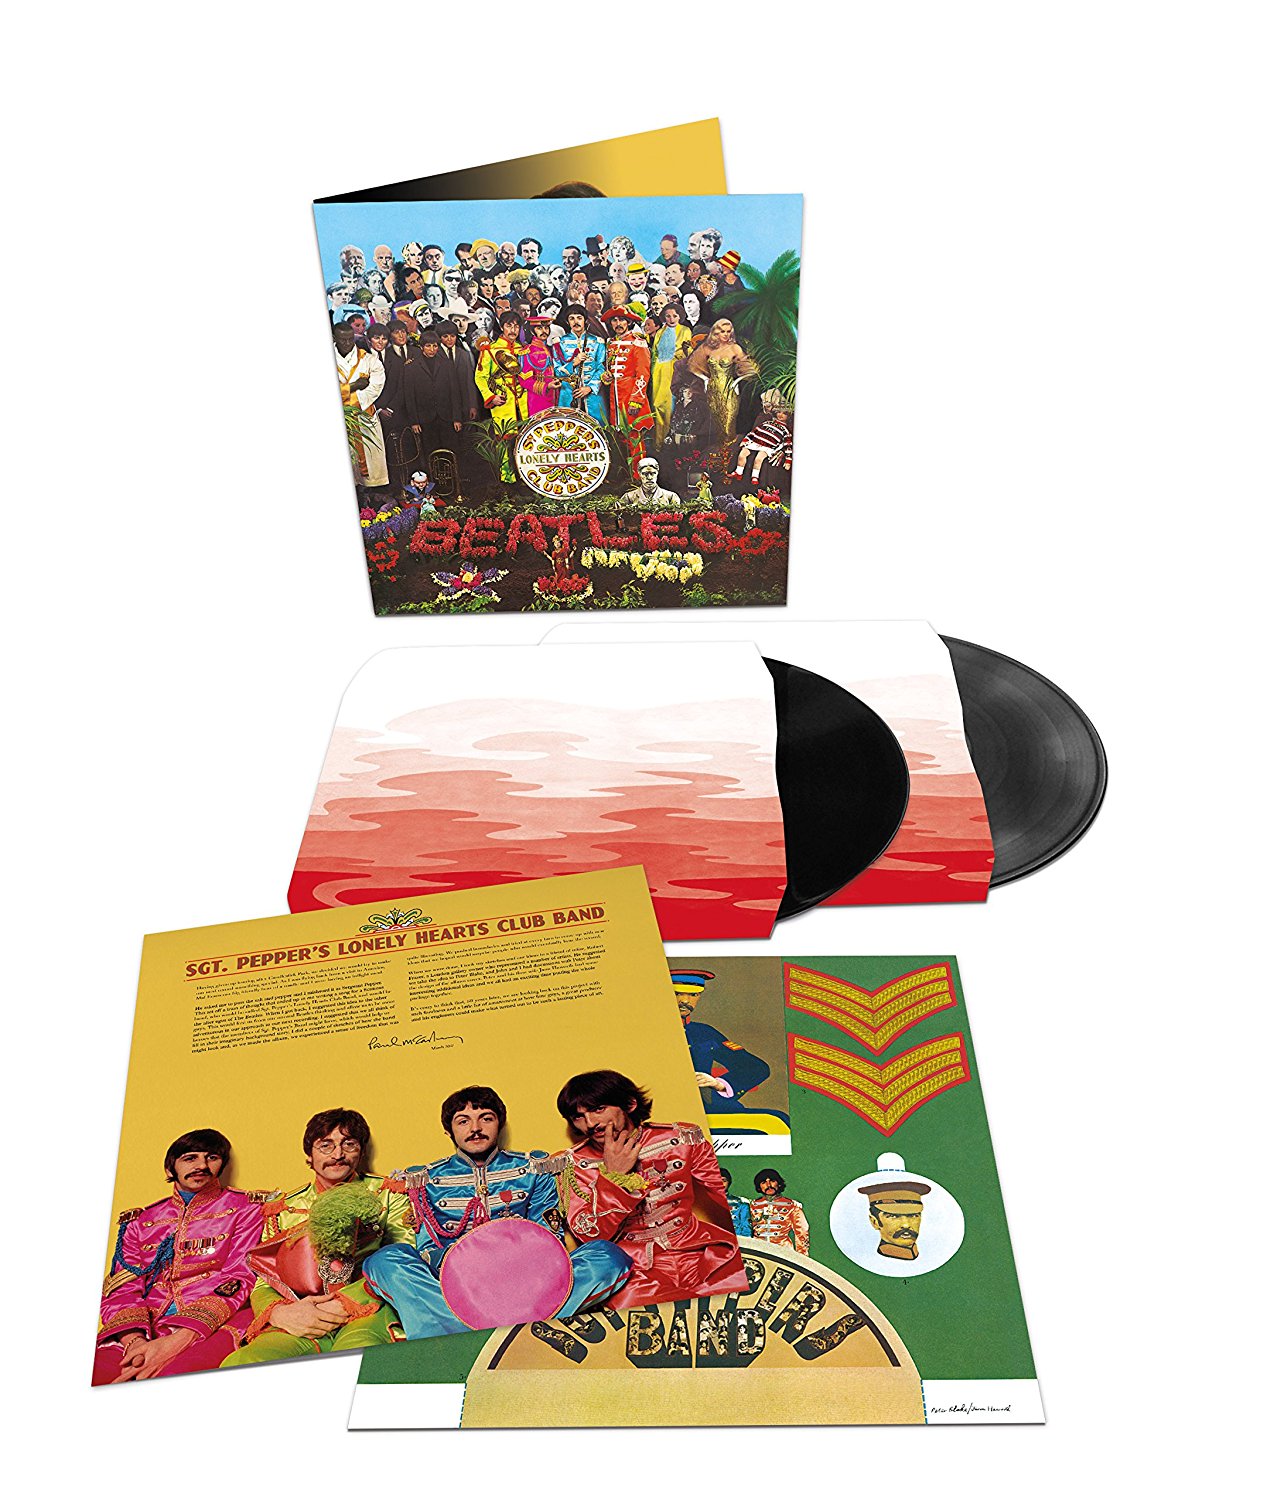 The Beatles - Sgt. Pepper's Lonely Hearts Club Band (Super Deluxe Edition):  lyrics and songs